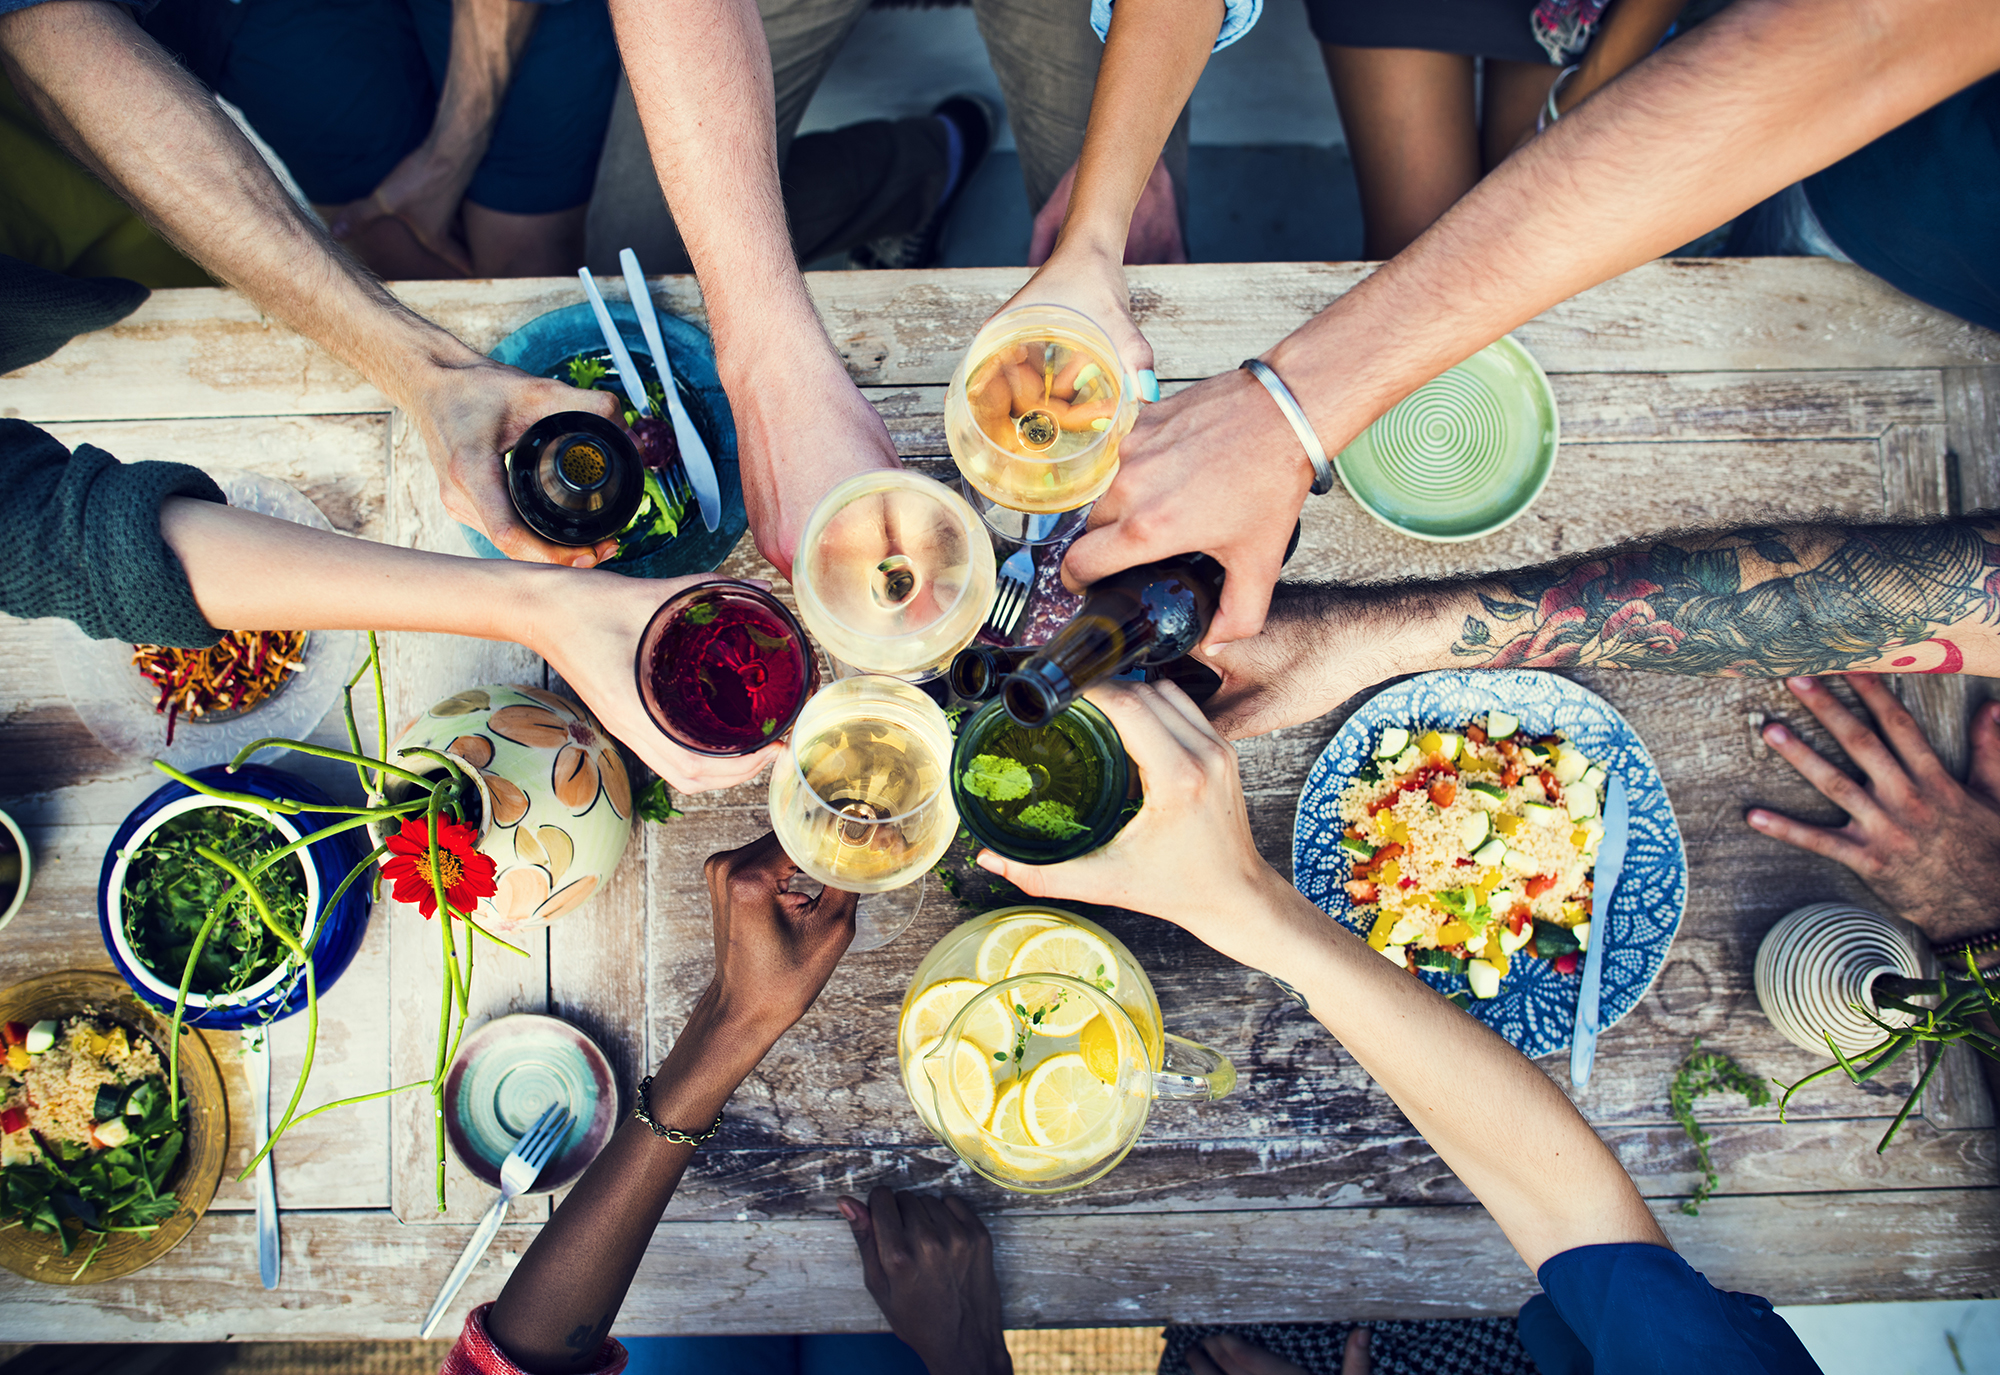 People raising glasses on table of food. (Image: Shutterstock)